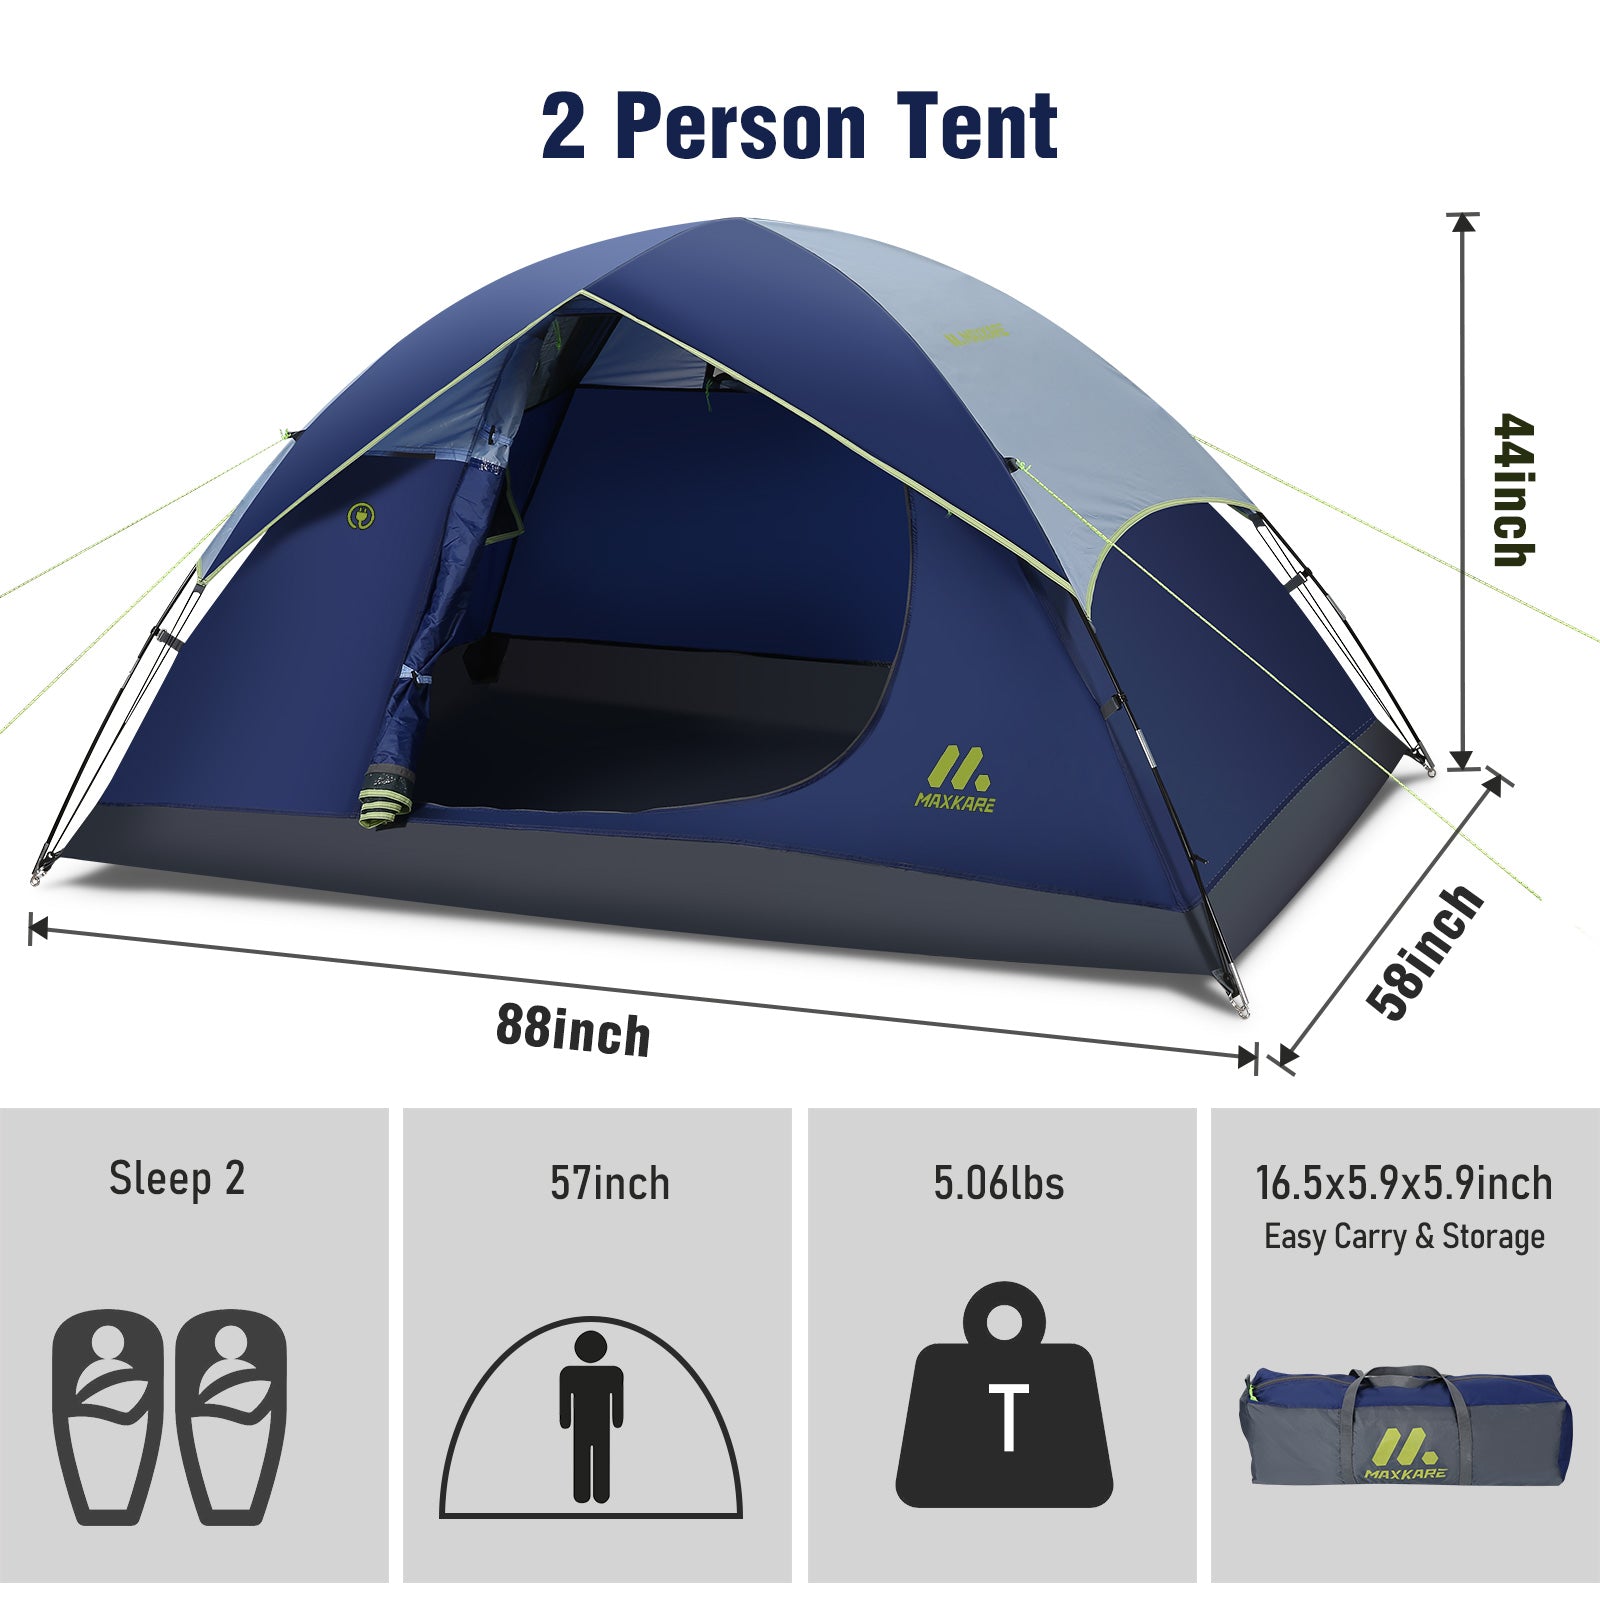 Load image into Gallery viewer, Maxkare 2 person Camping Tent
